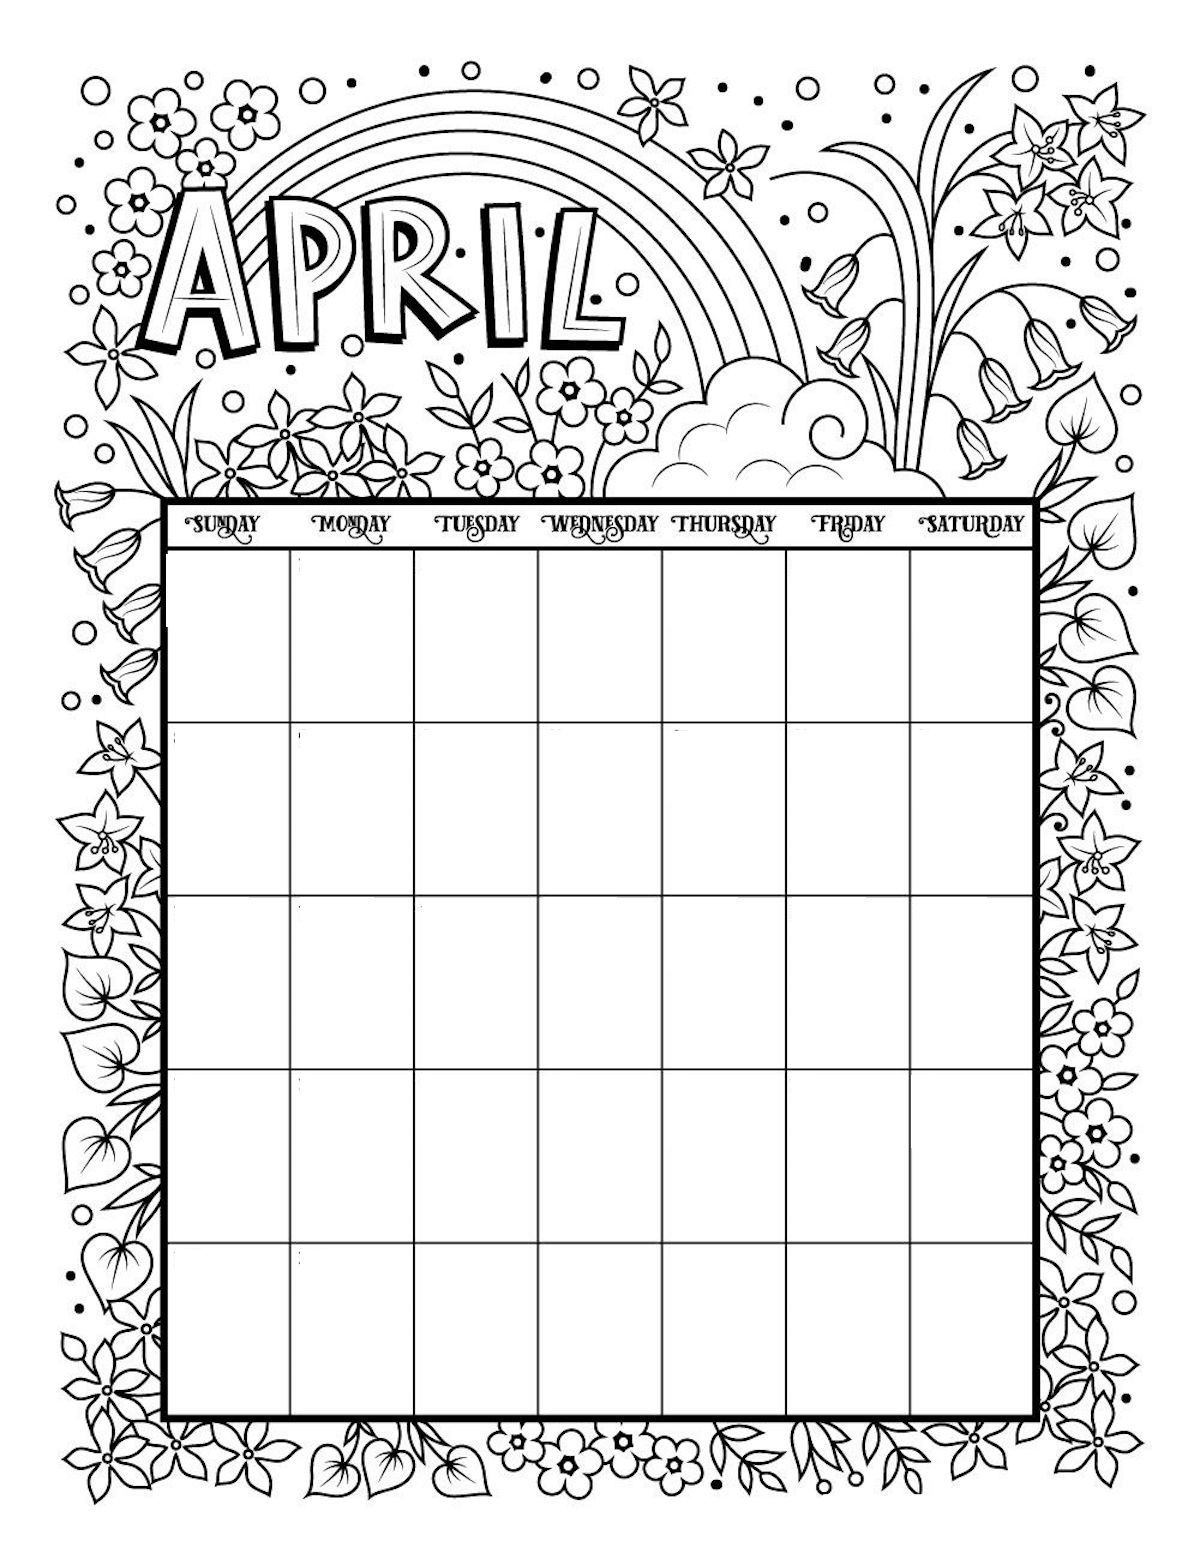 Free Printable Calendar Coloring Pages - Every Month Any Year